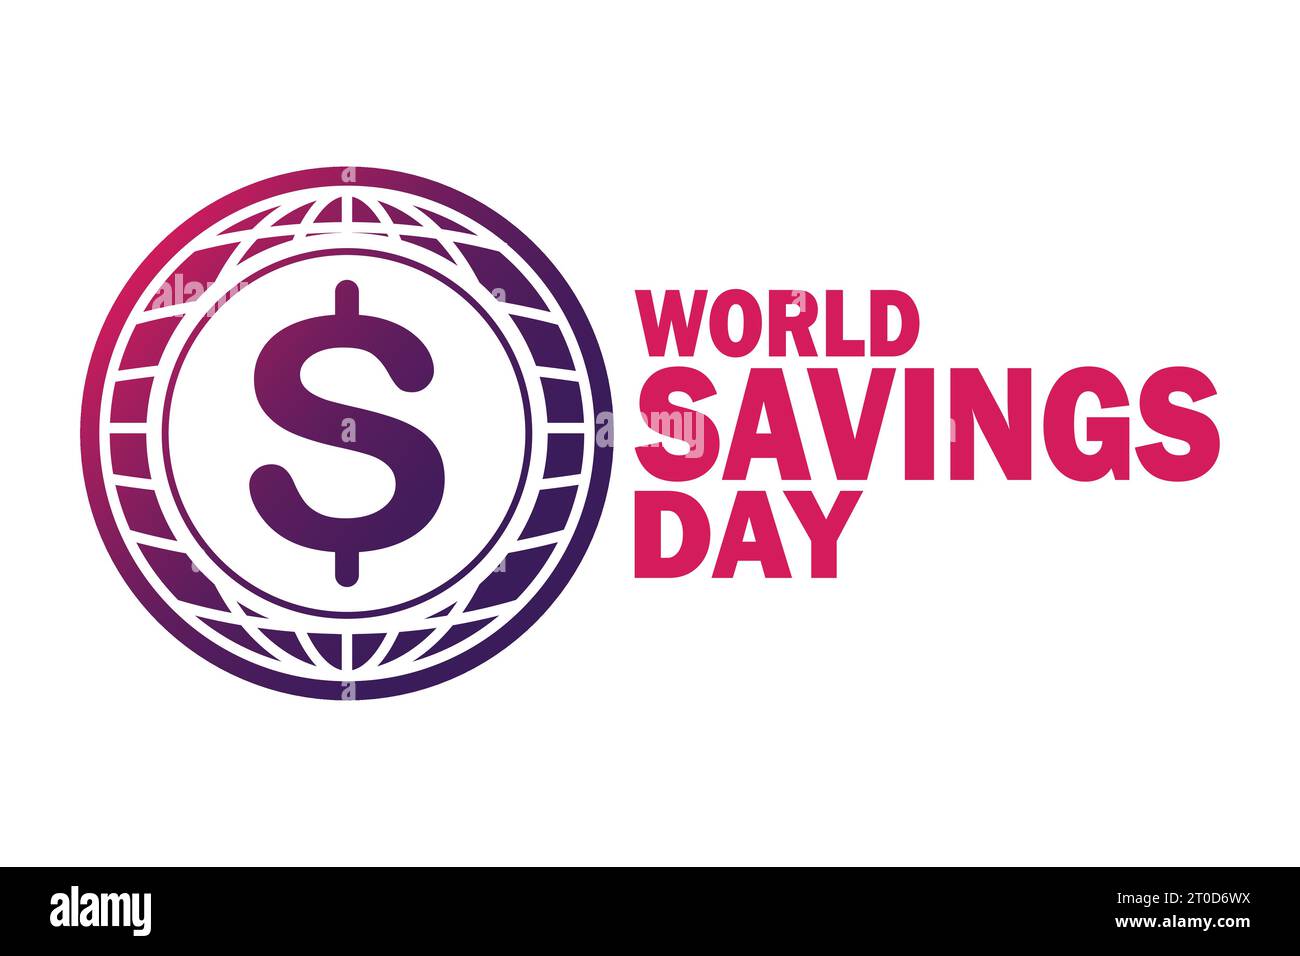 World Savings Day. Holiday concept. Template for background, banner, card, poster with text inscription. Vector illustration Stock Vector